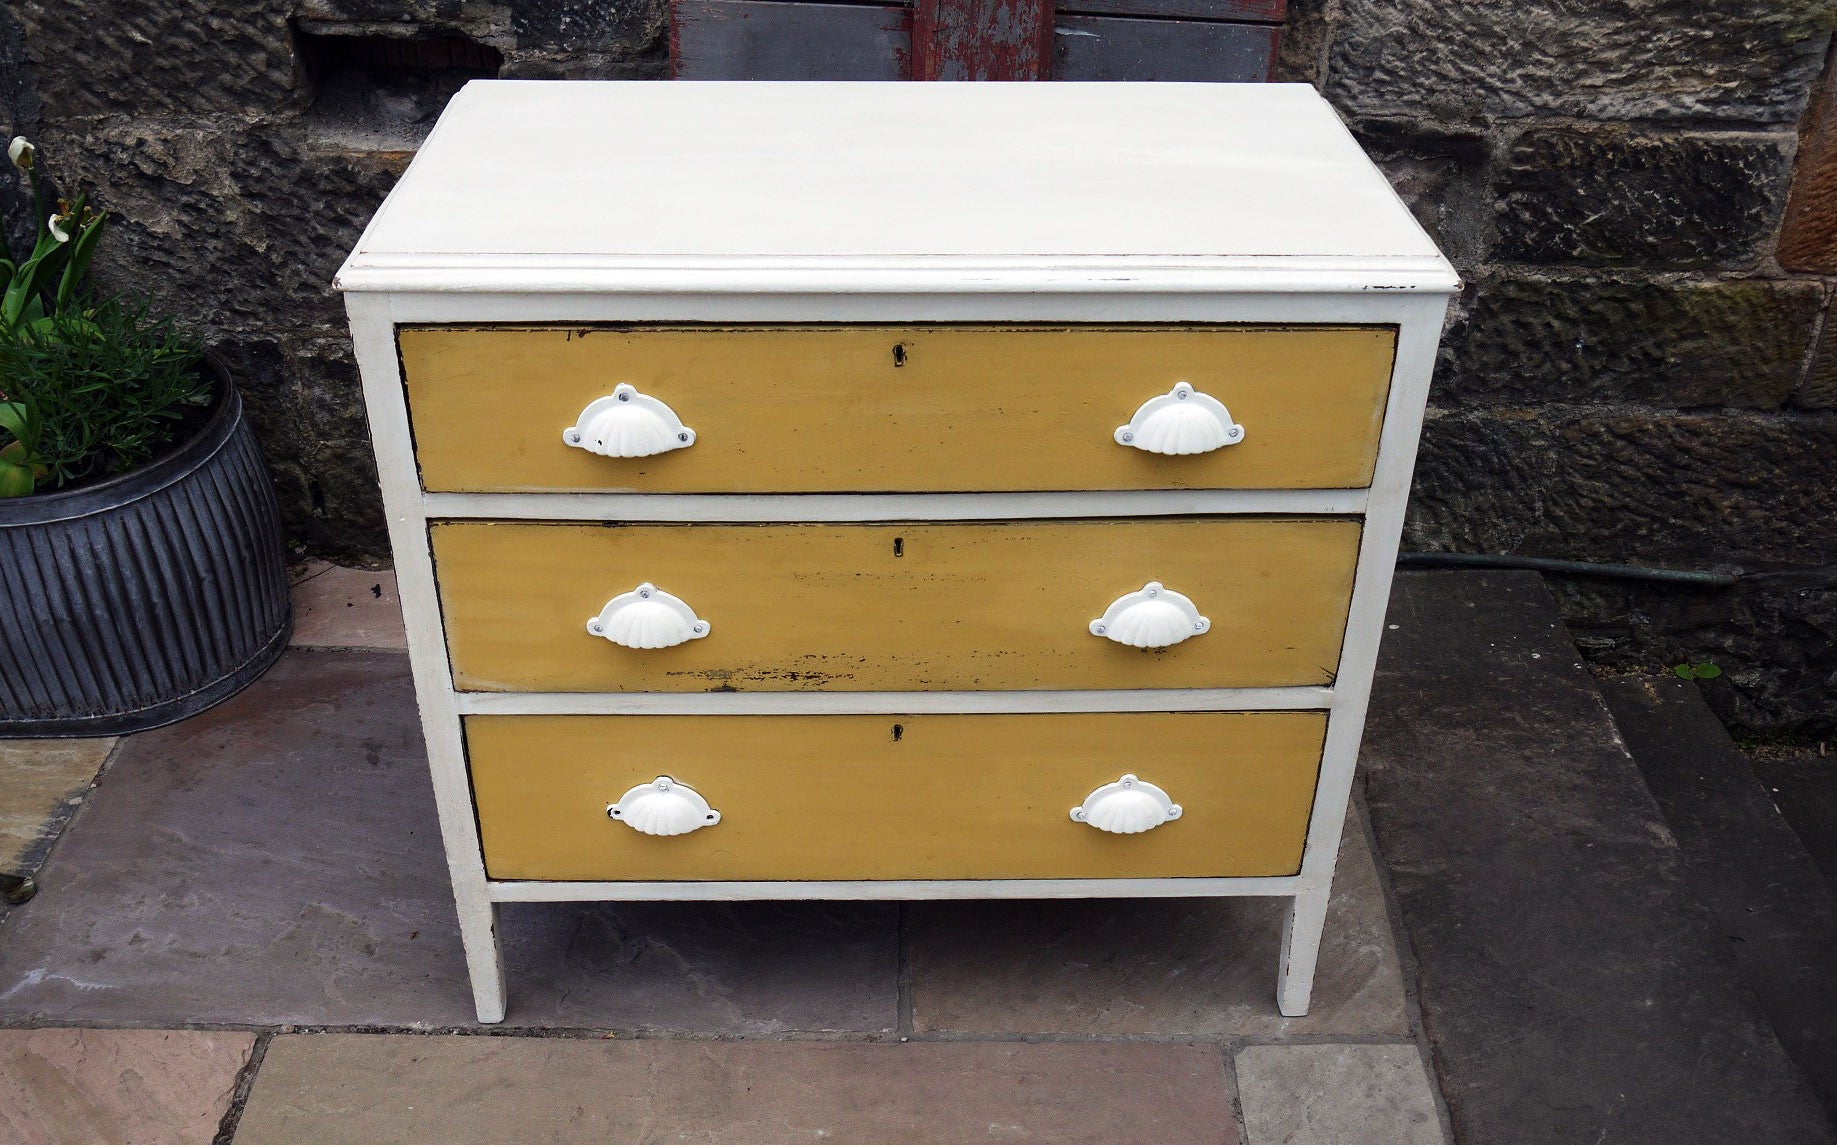 Refurbished vintage chest of drawers in Miss Mustard Seed Milk Paint with white handles